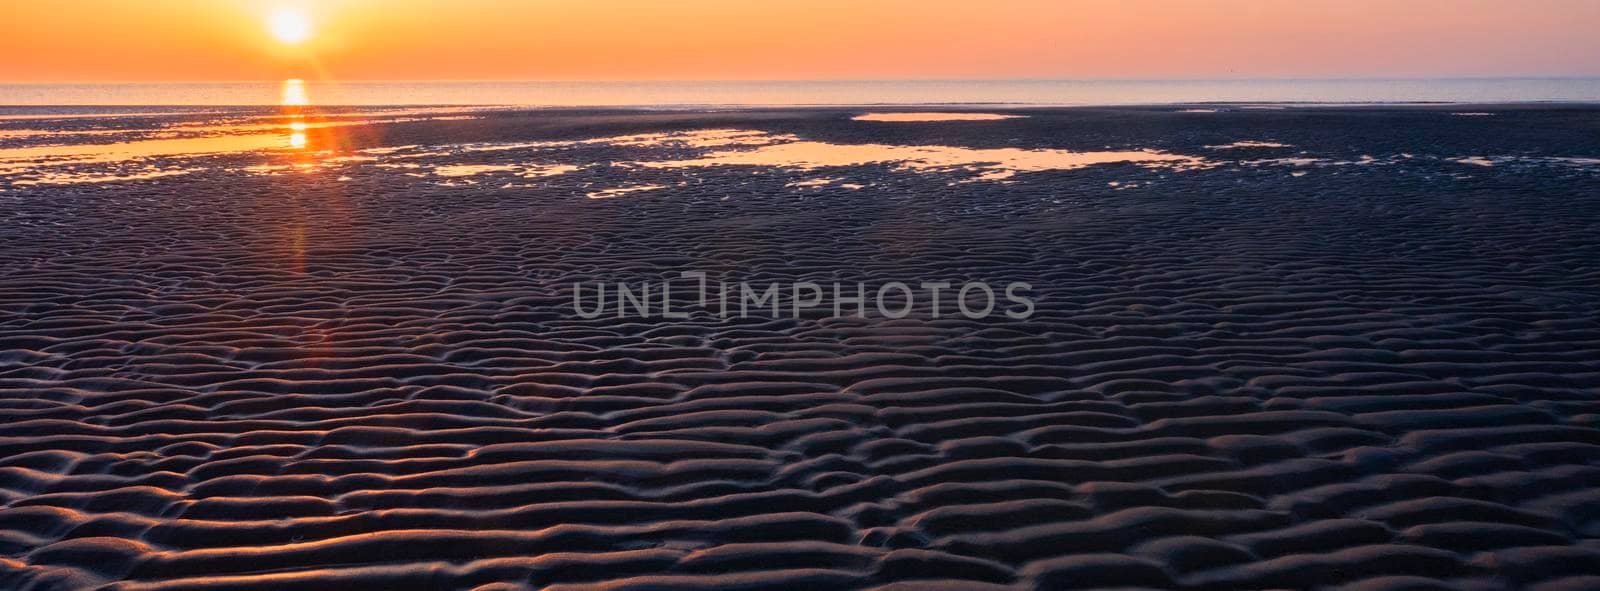 pattern in sand and colorful reflection of setting sun in water by ahavelaar